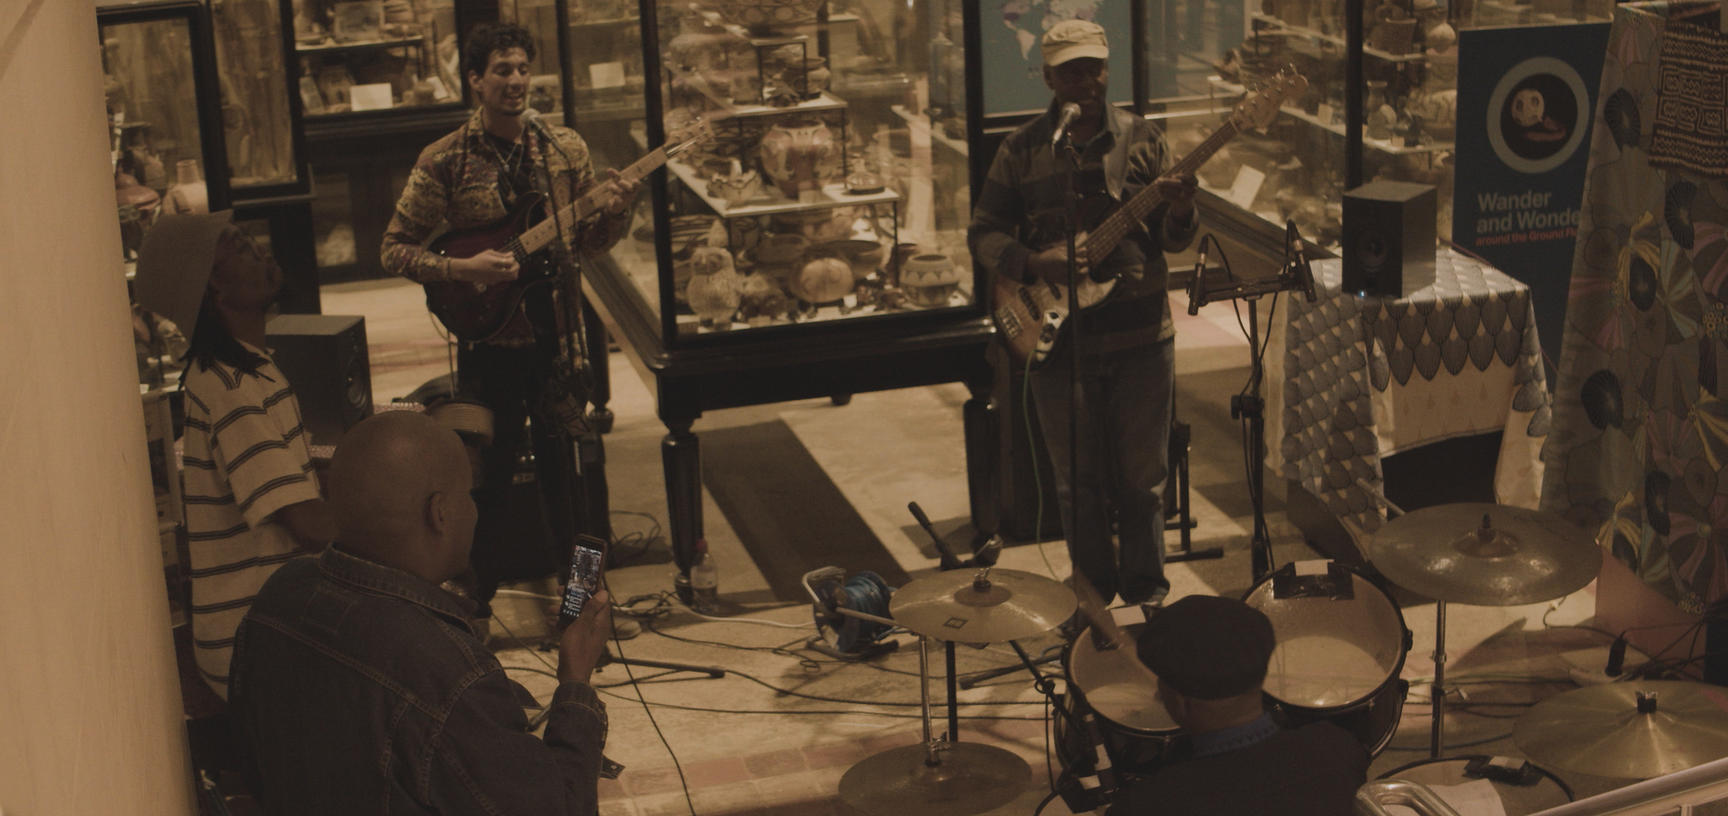 Four musicians play in the middle of Pitt Rivers Museum amoungst the artifact cases